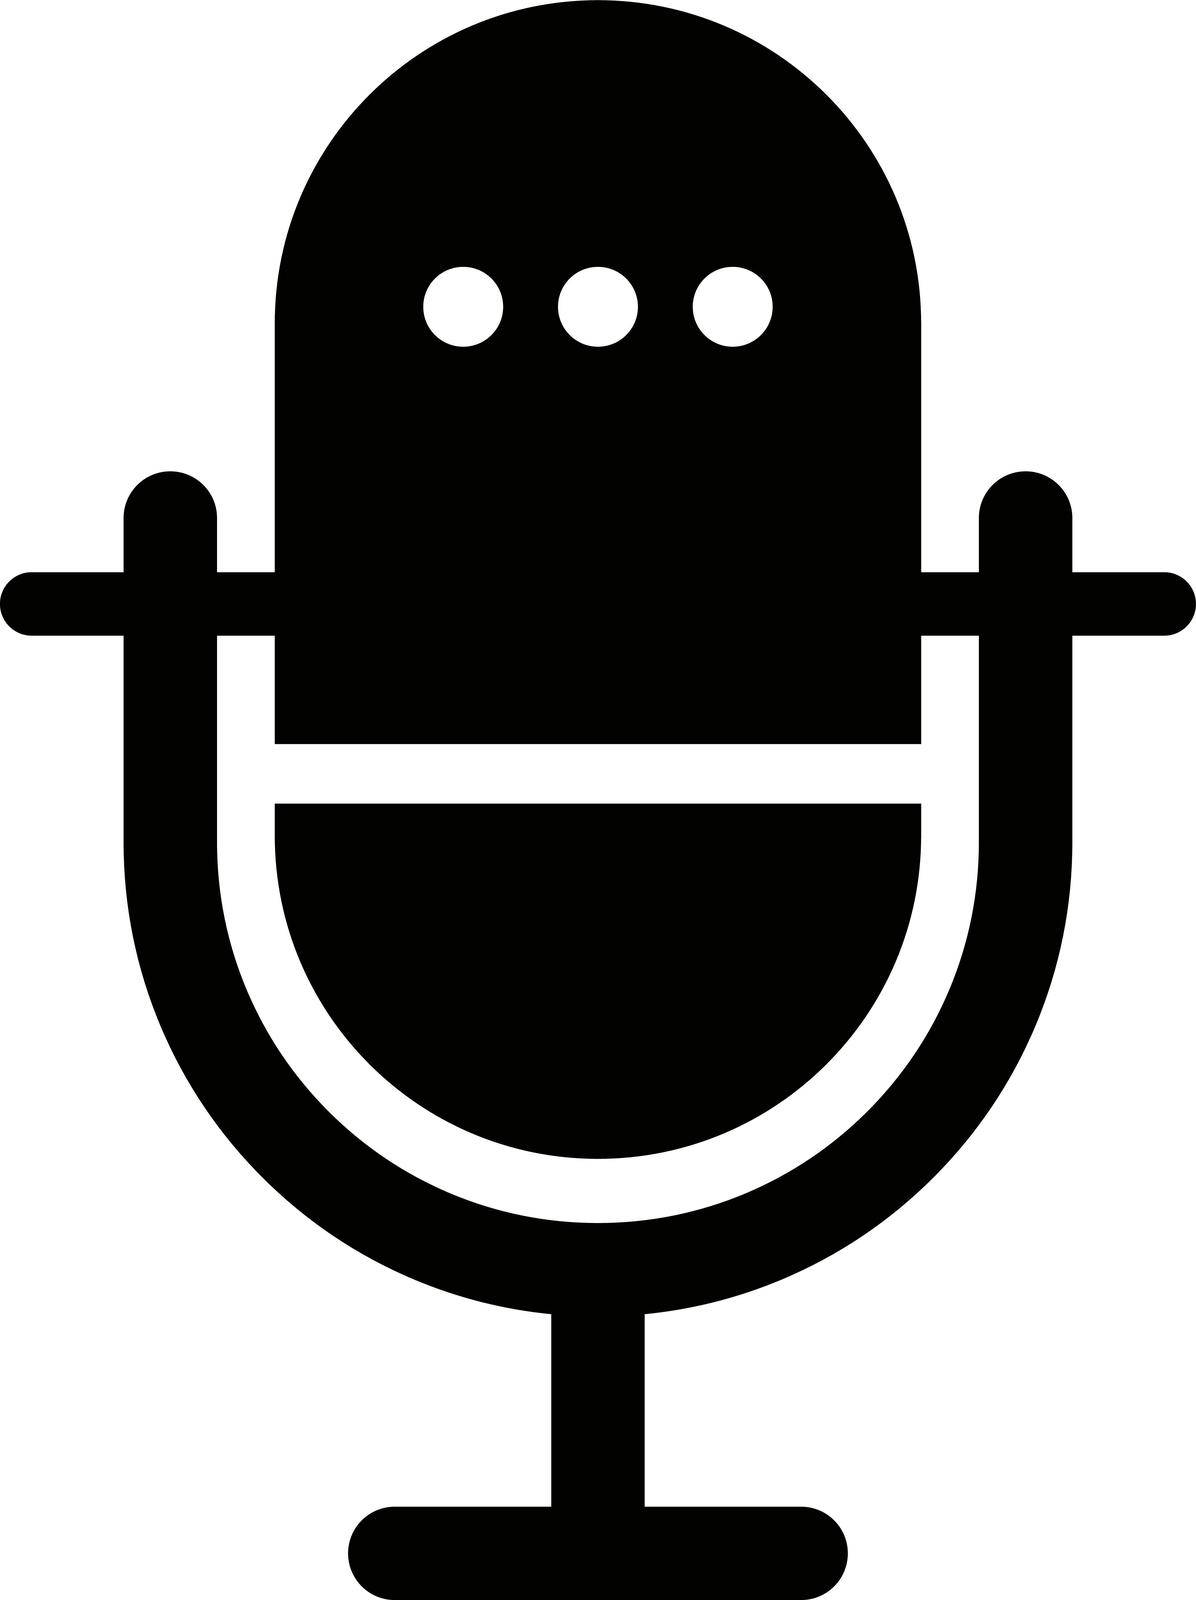 Fashionable microphone icon. Black color with vector. It is a retro icon. by illust_monster